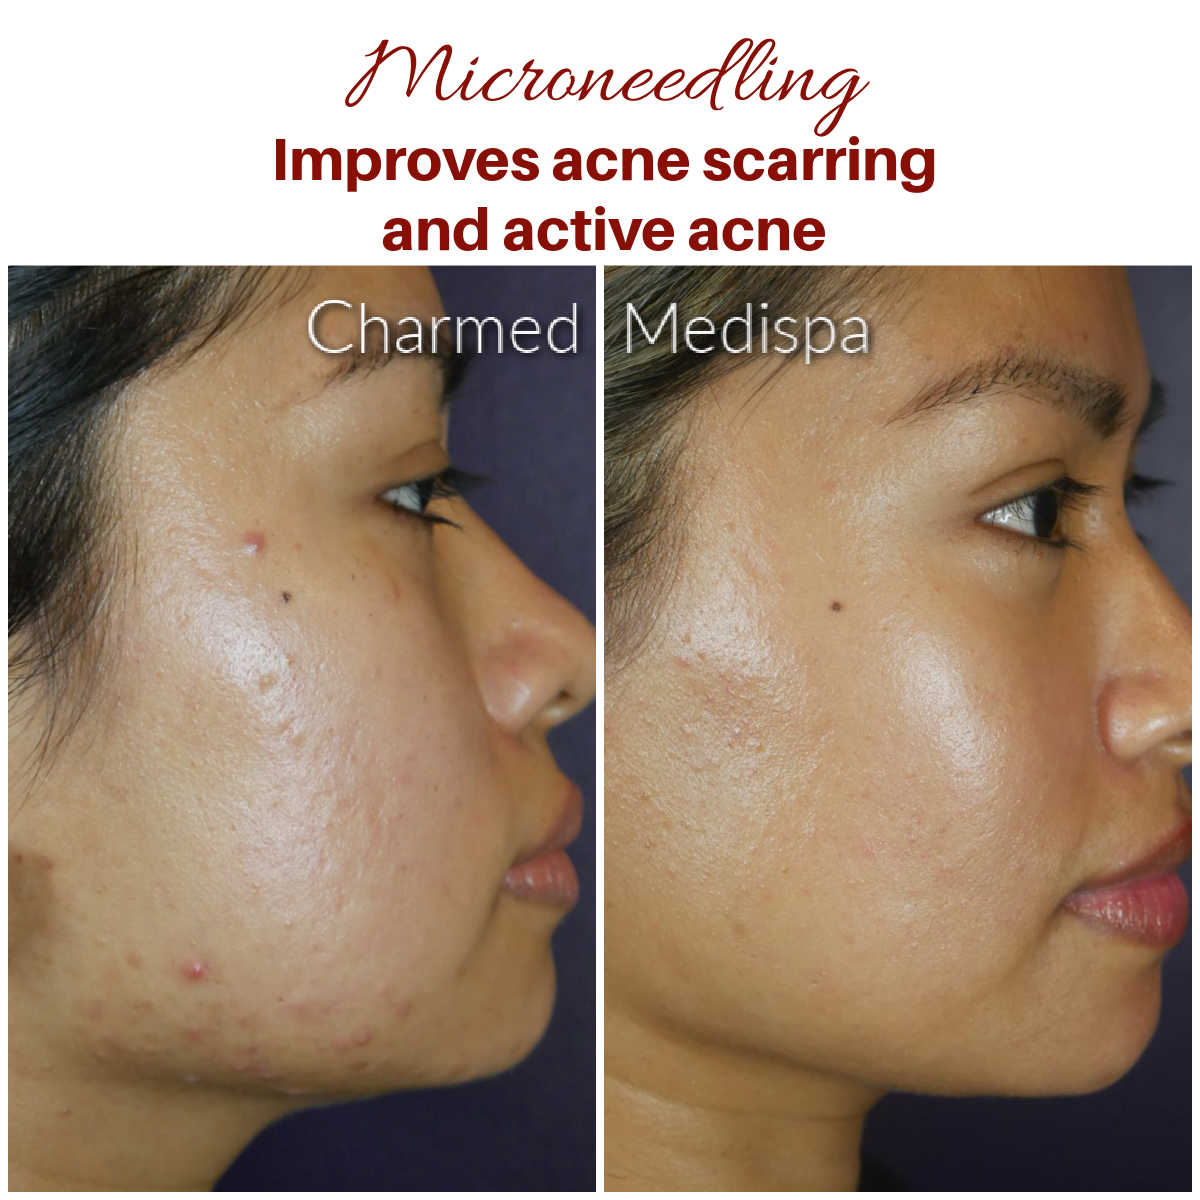 Charmed Medispa Microneedling Acne Scarring Results 1 